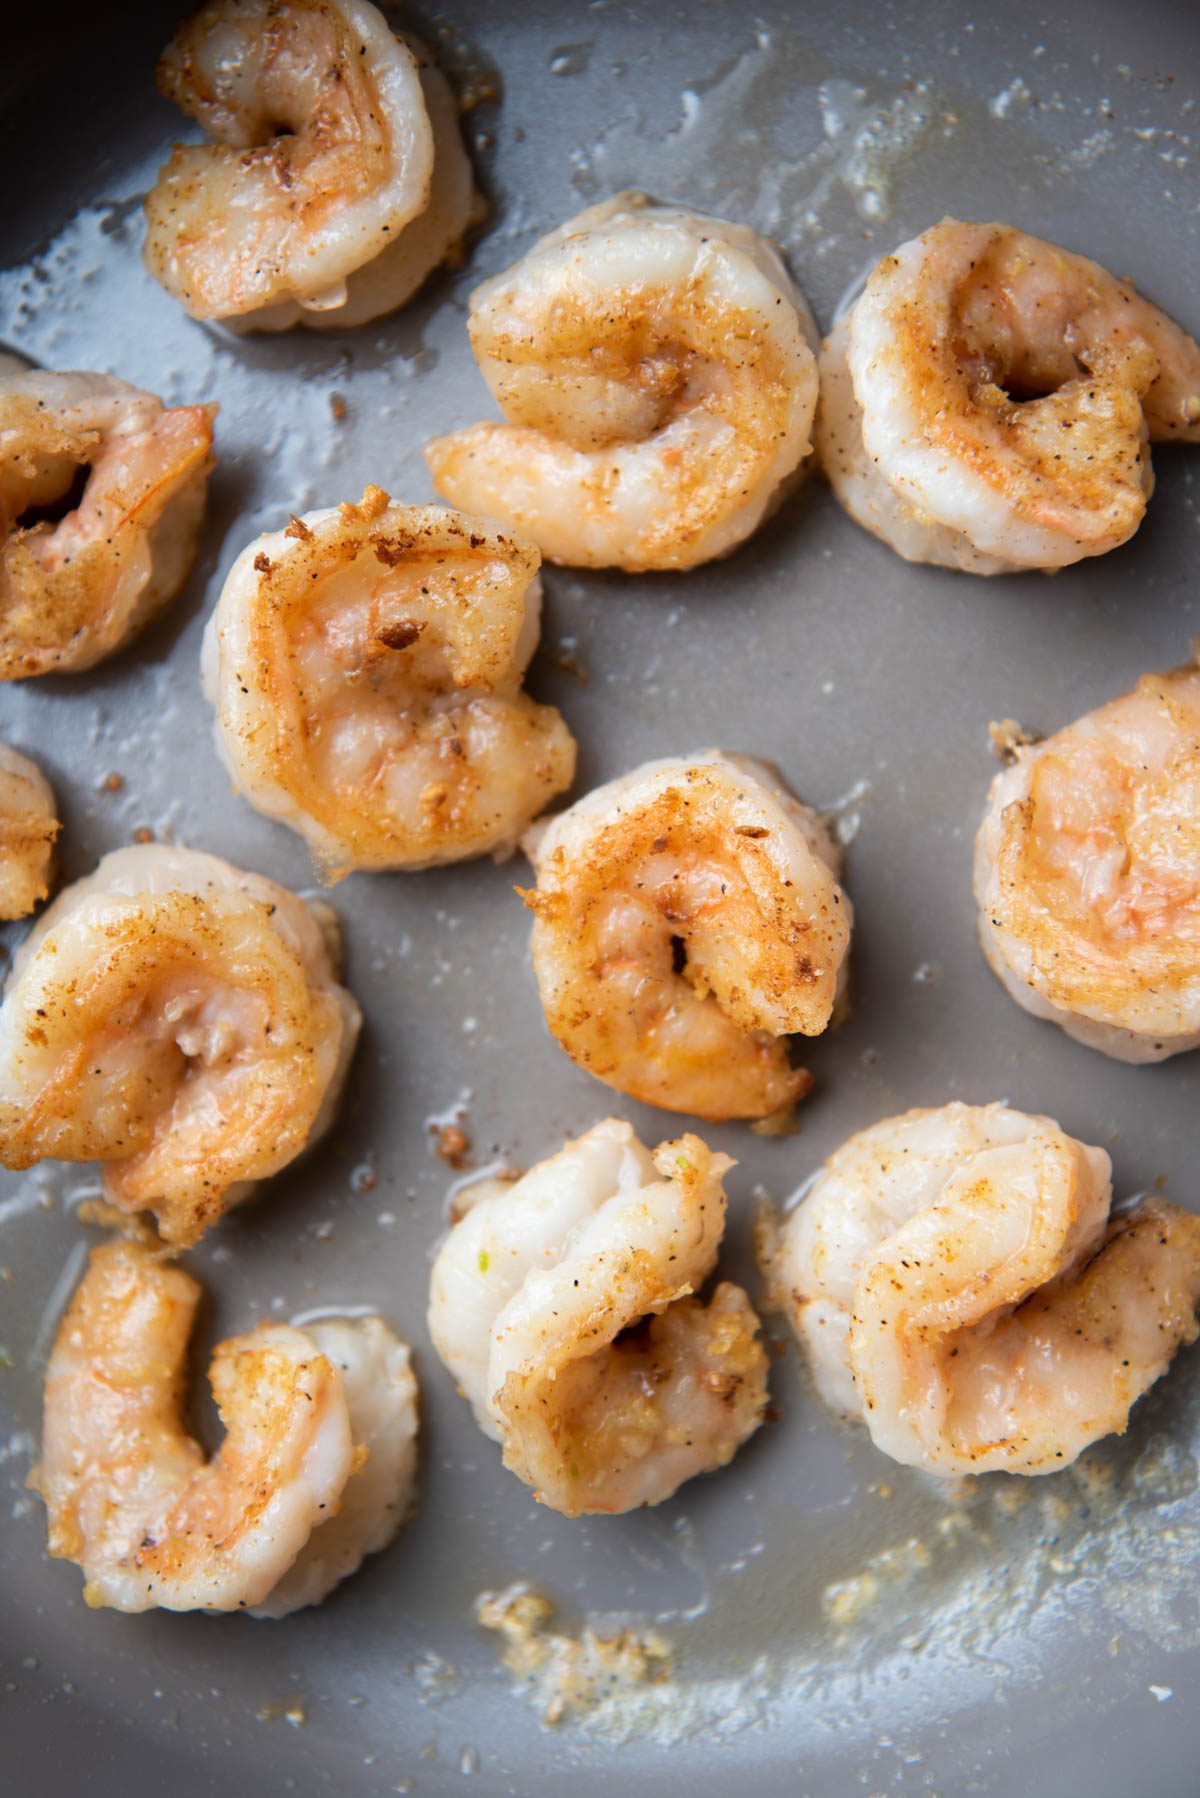 Shrimp in pan with garlic and butter.